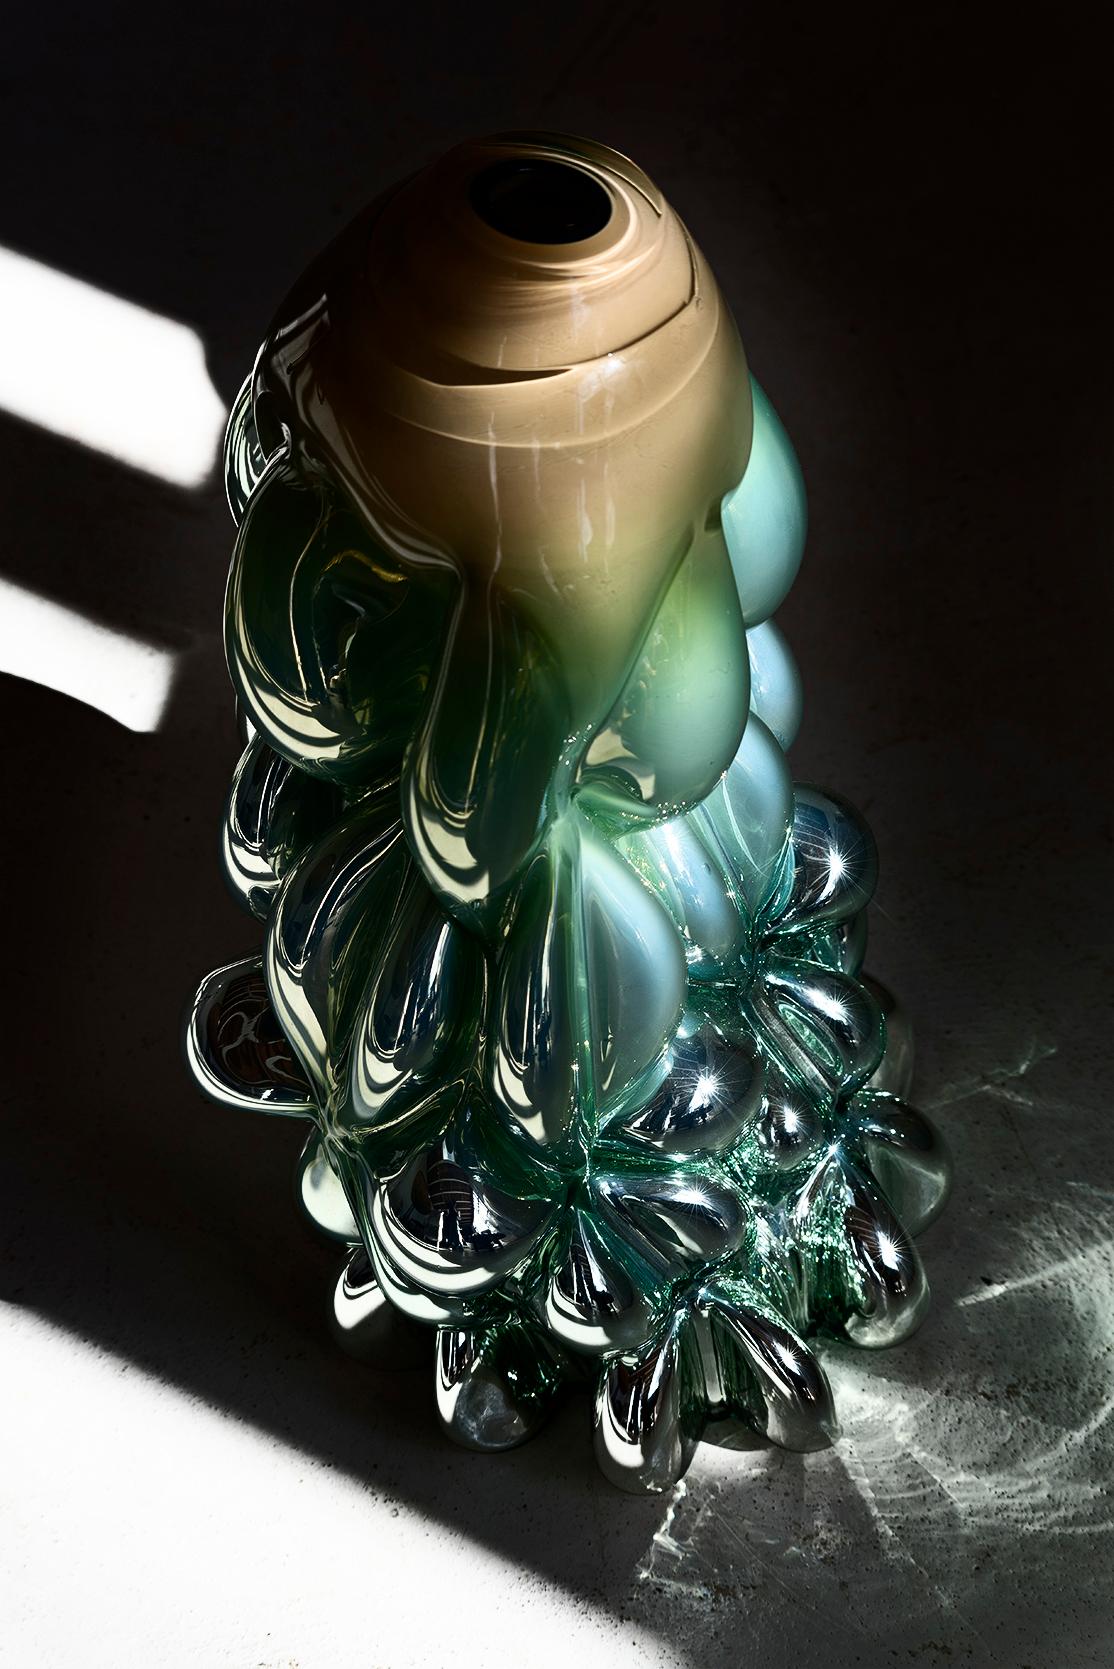 Hannah Hansdotter
Vase model “Tiffany Print”
Manufactured by Hannah Hansdotter
Produced in exclusive for SIDE GALLERY
Sweden, 2020
Hand blown glass

Pale Green & Silver Glass Vase 

Measurements
26 cm diameter x 51cm height
10,23 in